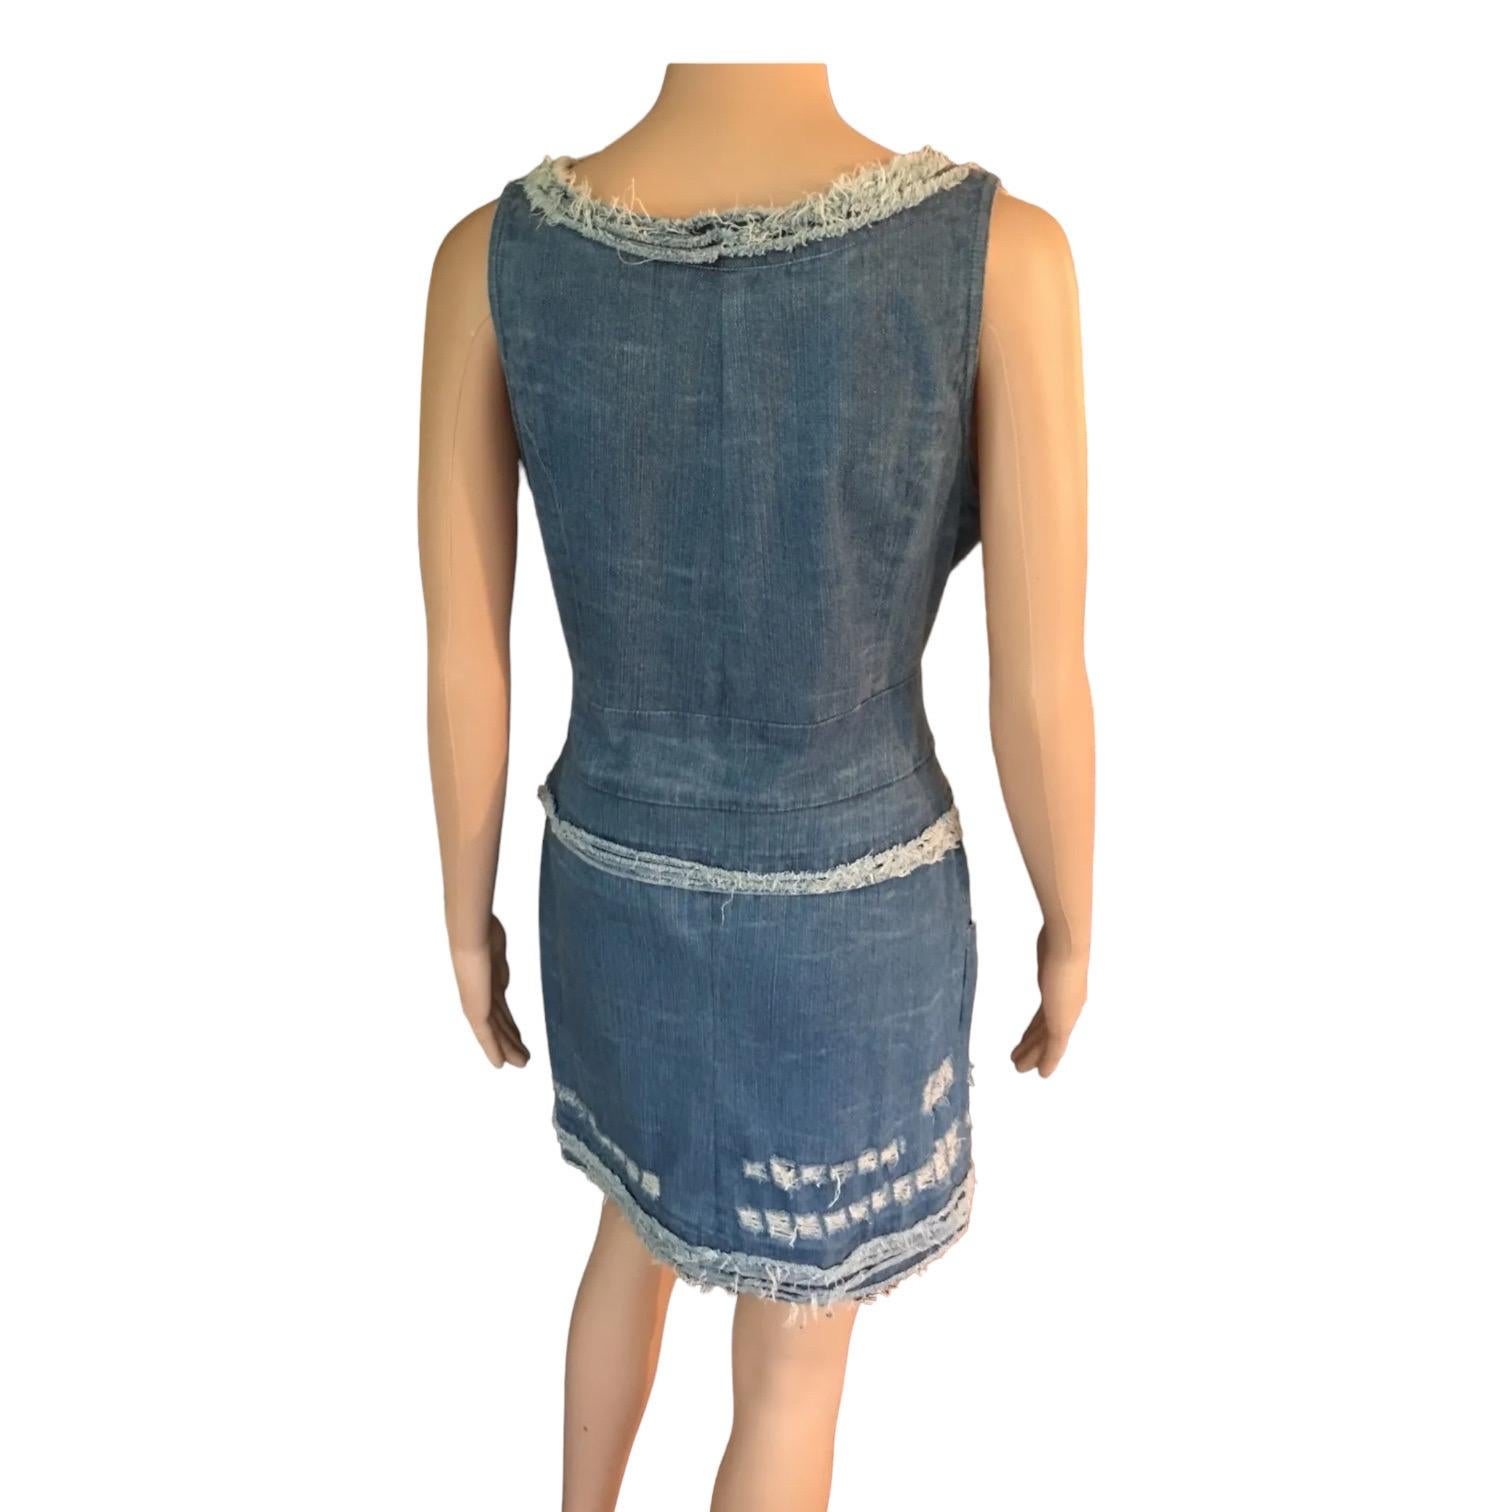 Chanel F/W 2008 Runway Distressed Denim Front Zipper Dress In Good Condition For Sale In Naples, FL